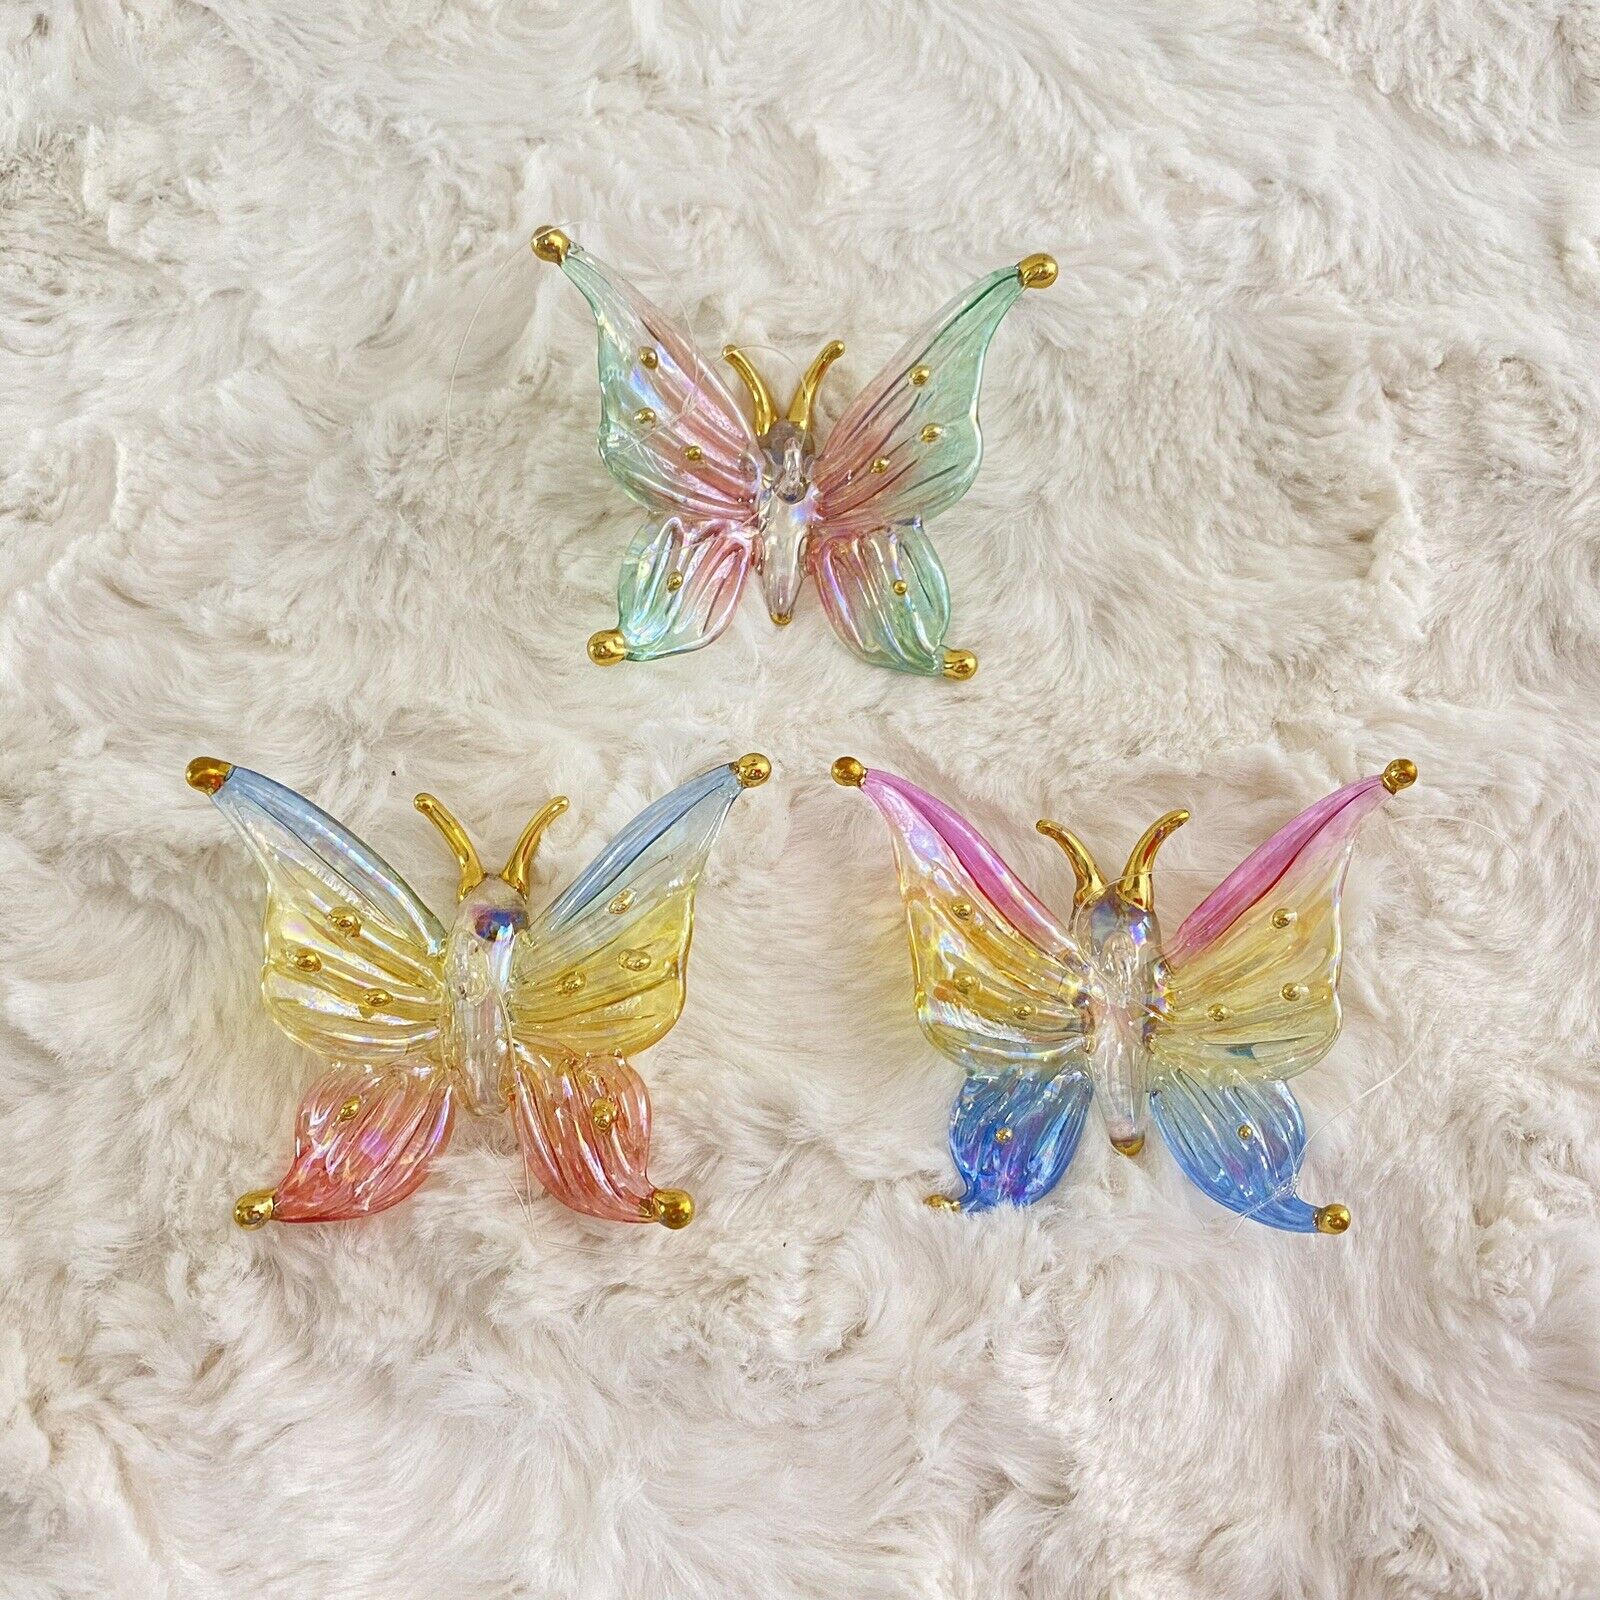 3X VTG Rare Iridescent Butterfly Glass Ornaments With Gold Details